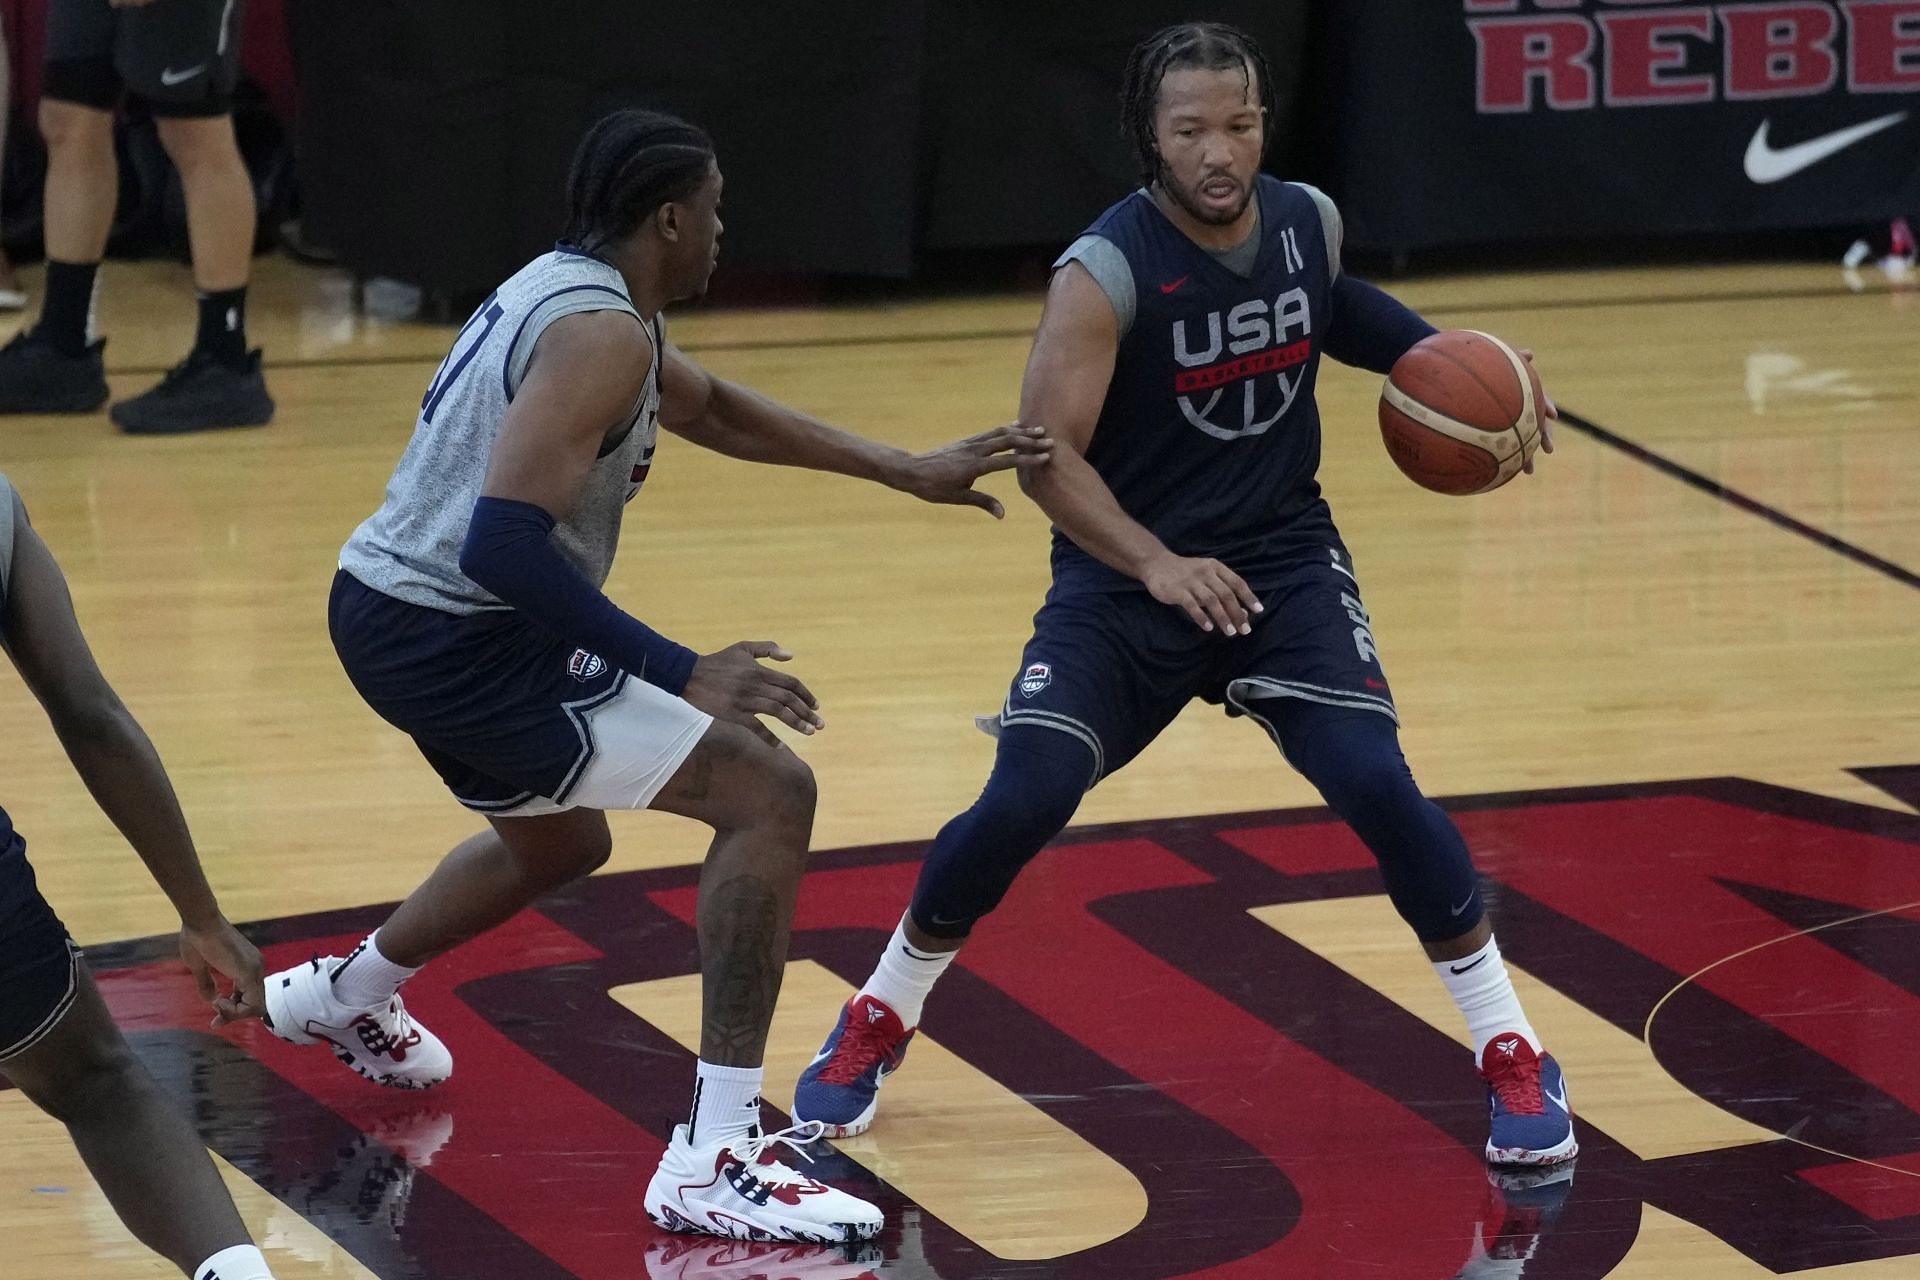 USA vs Puerto Rico FIBA World Cup 2023 tuneup, August 7th Date, time, where to watch, live stream details, and more